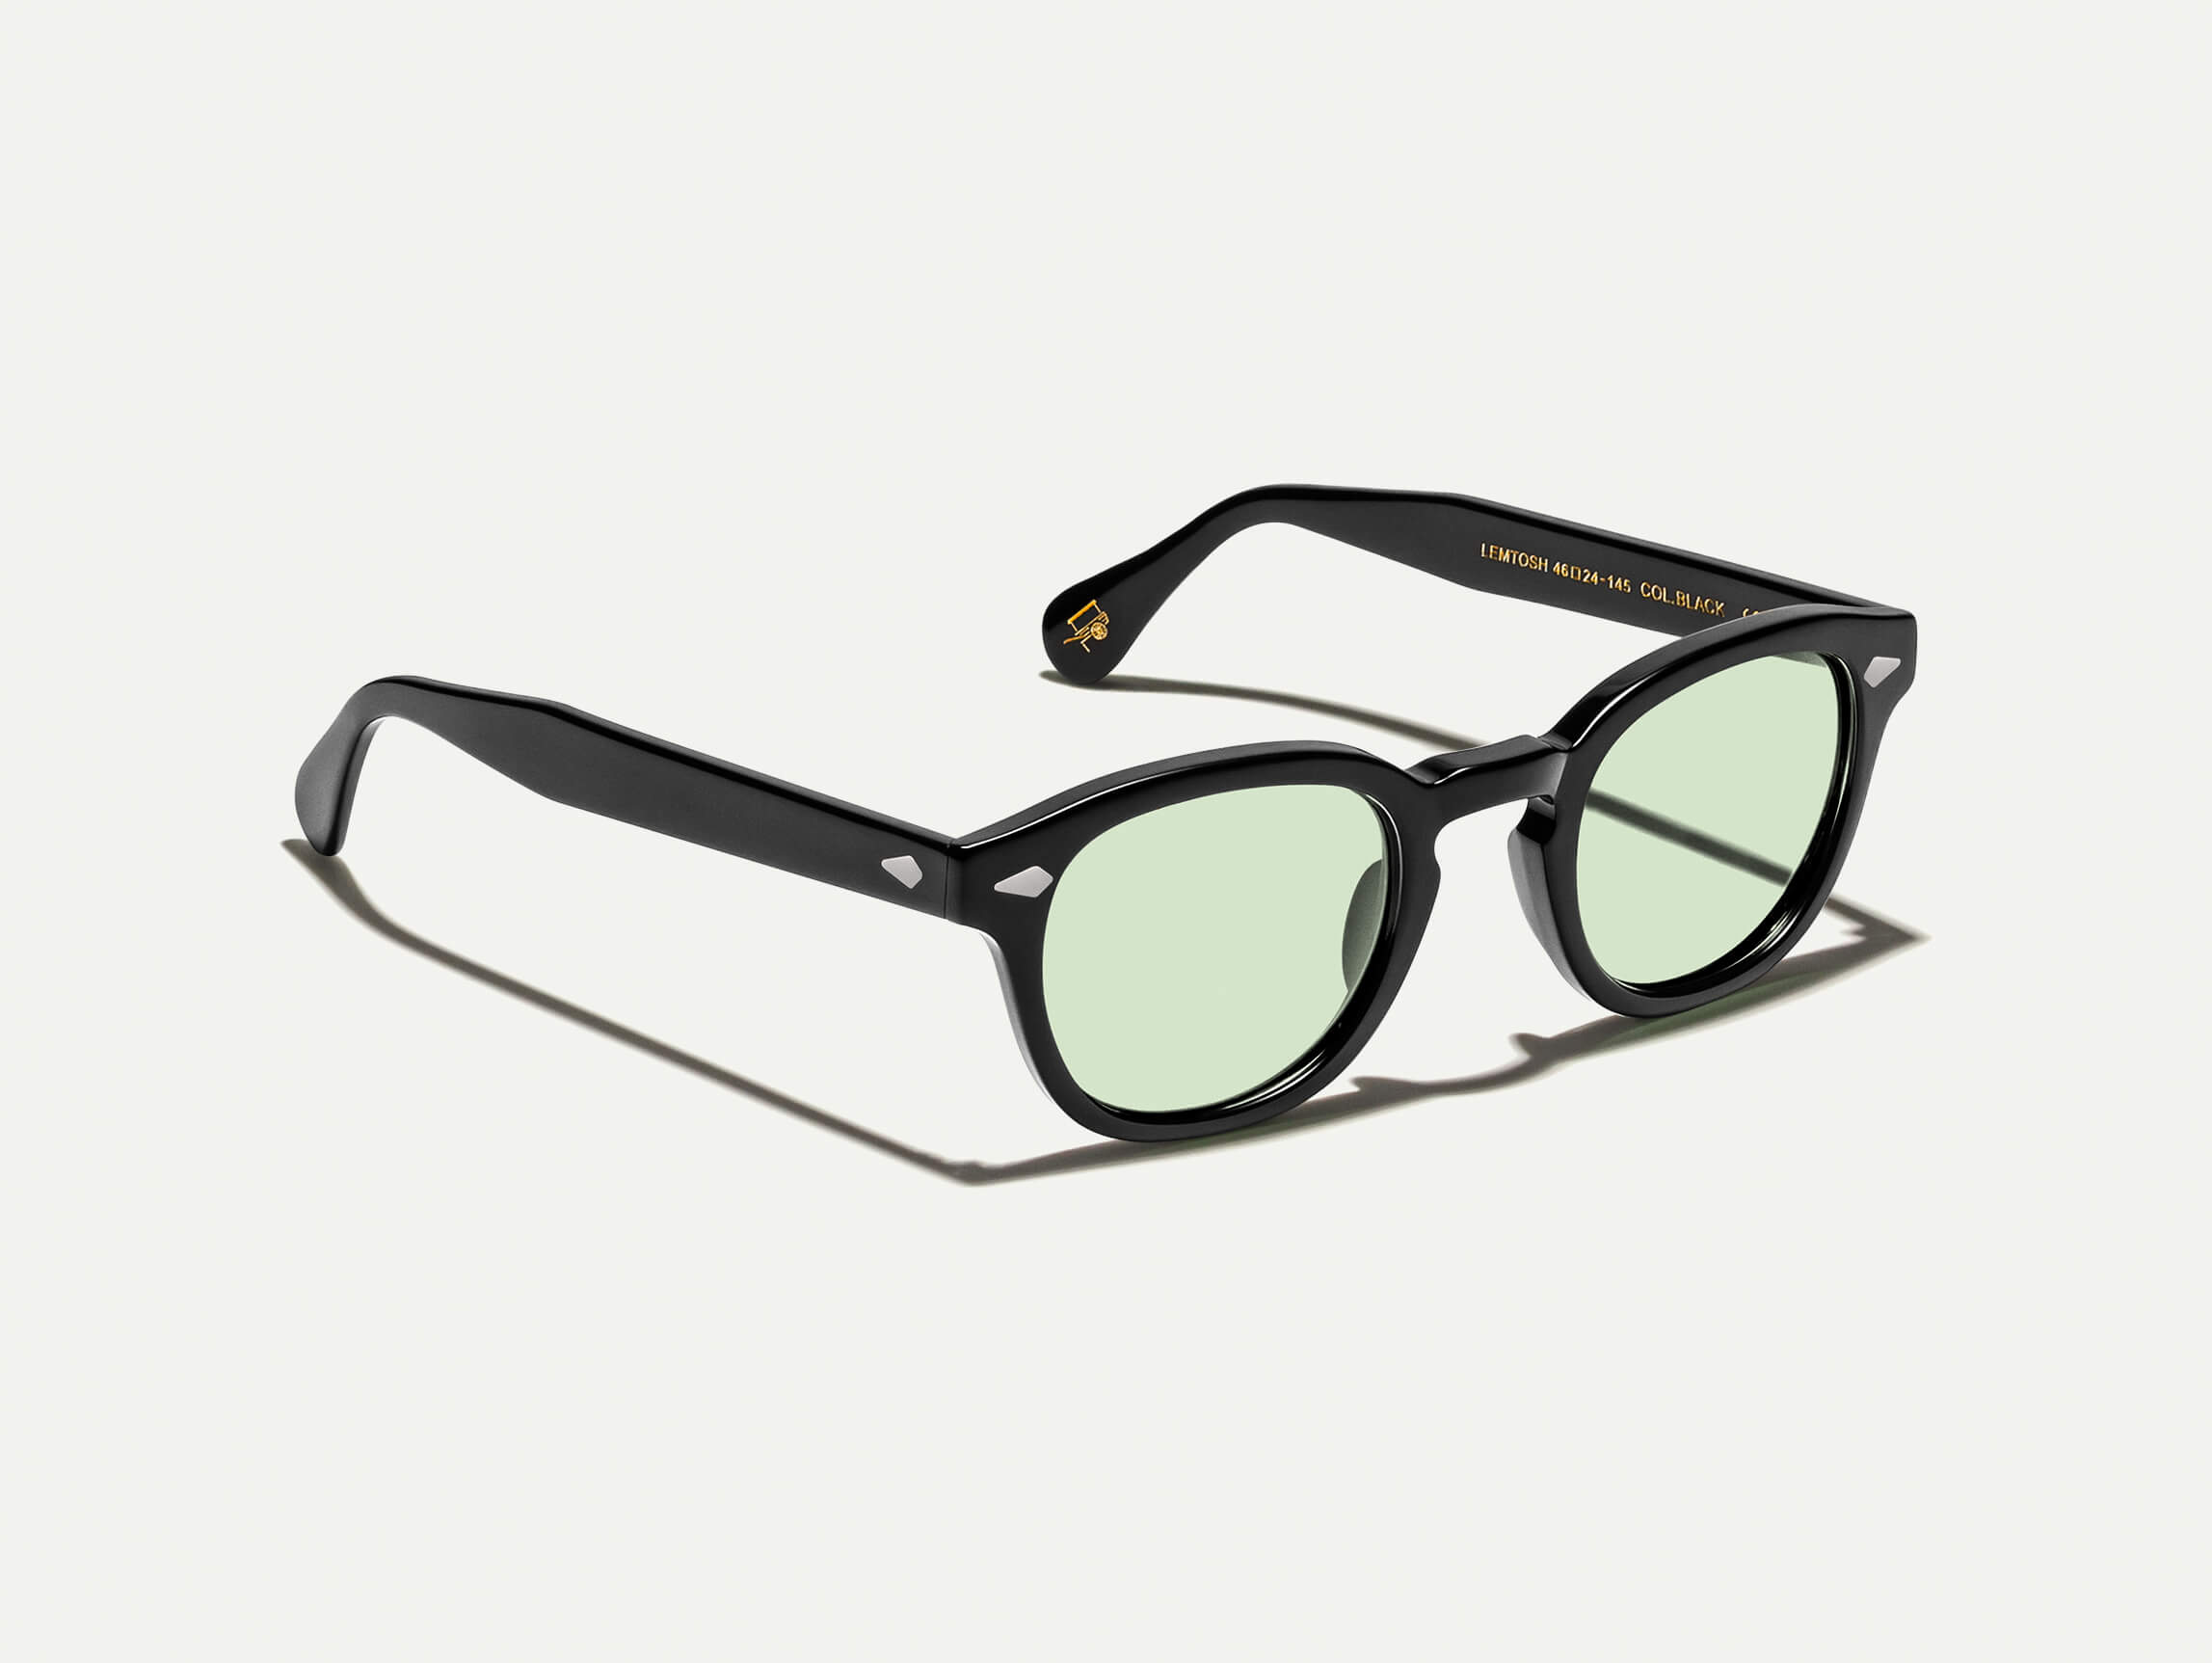 The LEMTOSH Black with Limelight Tinted Lenses